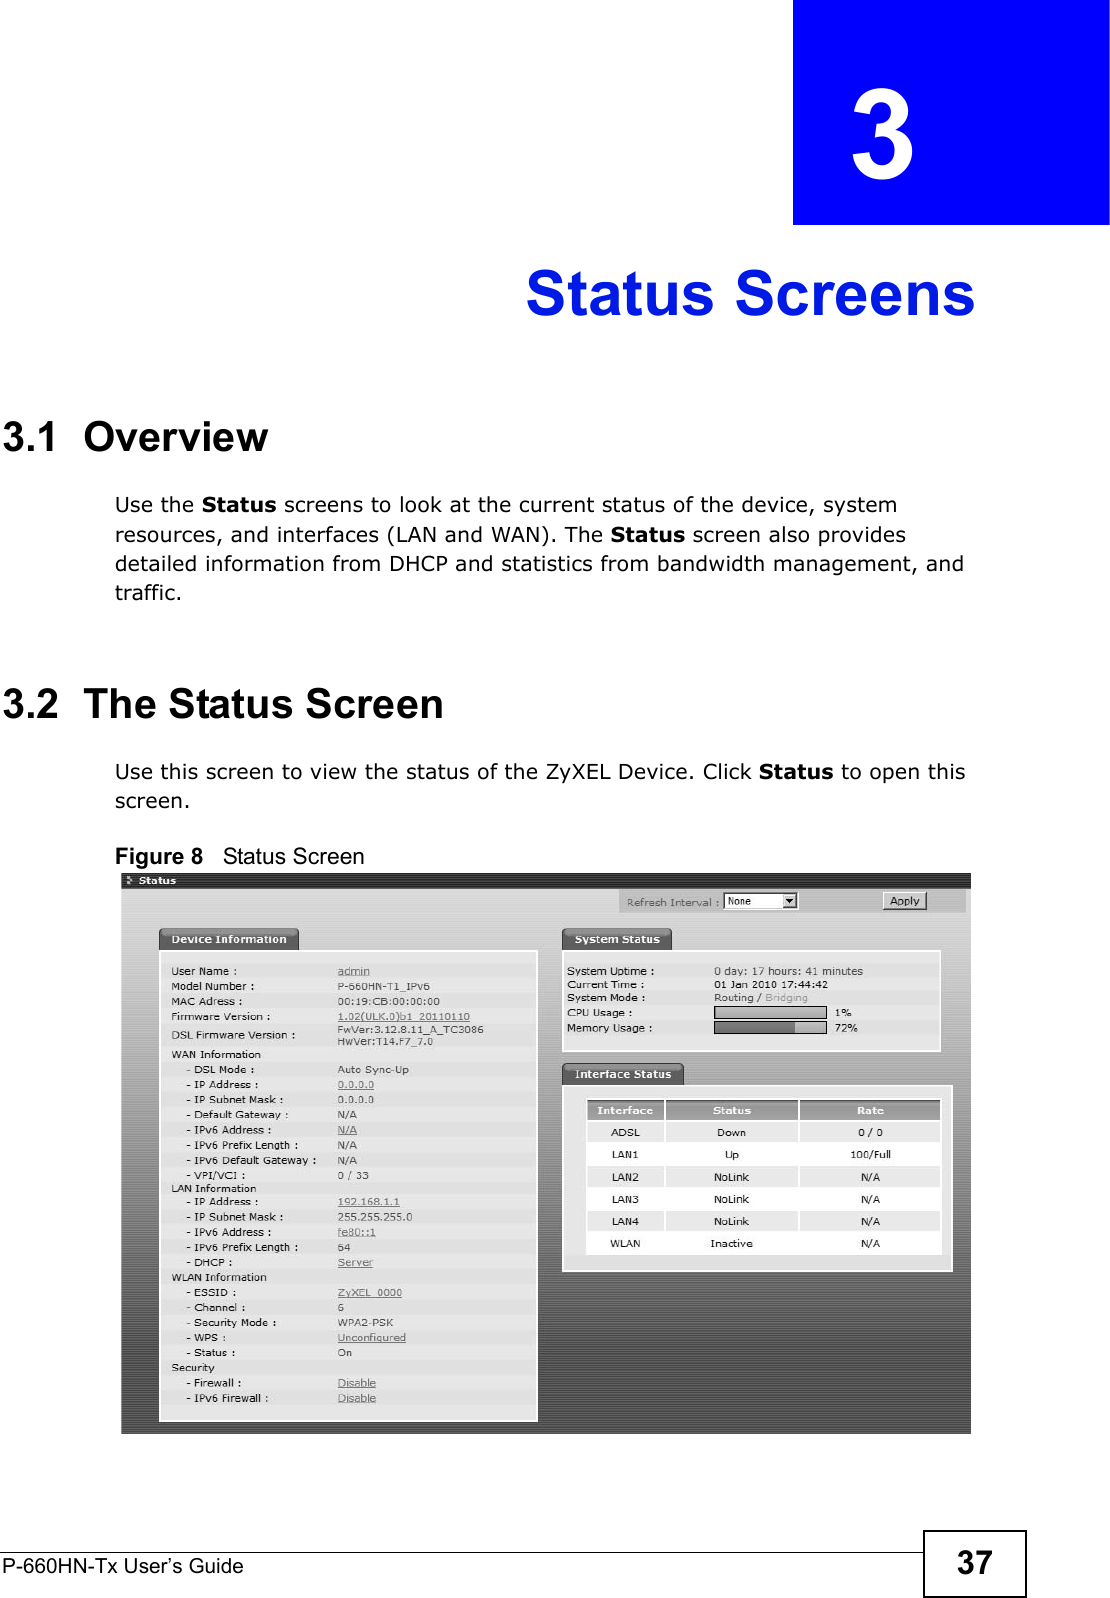 P-660HN-Tx User’s Guide 37CHAPTER  3 Status Screens3.1  OverviewUse the Status screens to look at the current status of the device, system resources, and interfaces (LAN and WAN). The Status screen also provides detailed information from DHCP and statistics from bandwidth management, and traffic.3.2  The Status Screen Use this screen to view the status of the ZyXEL Device. Click Status to open this screen.Figure 8   Status Screen